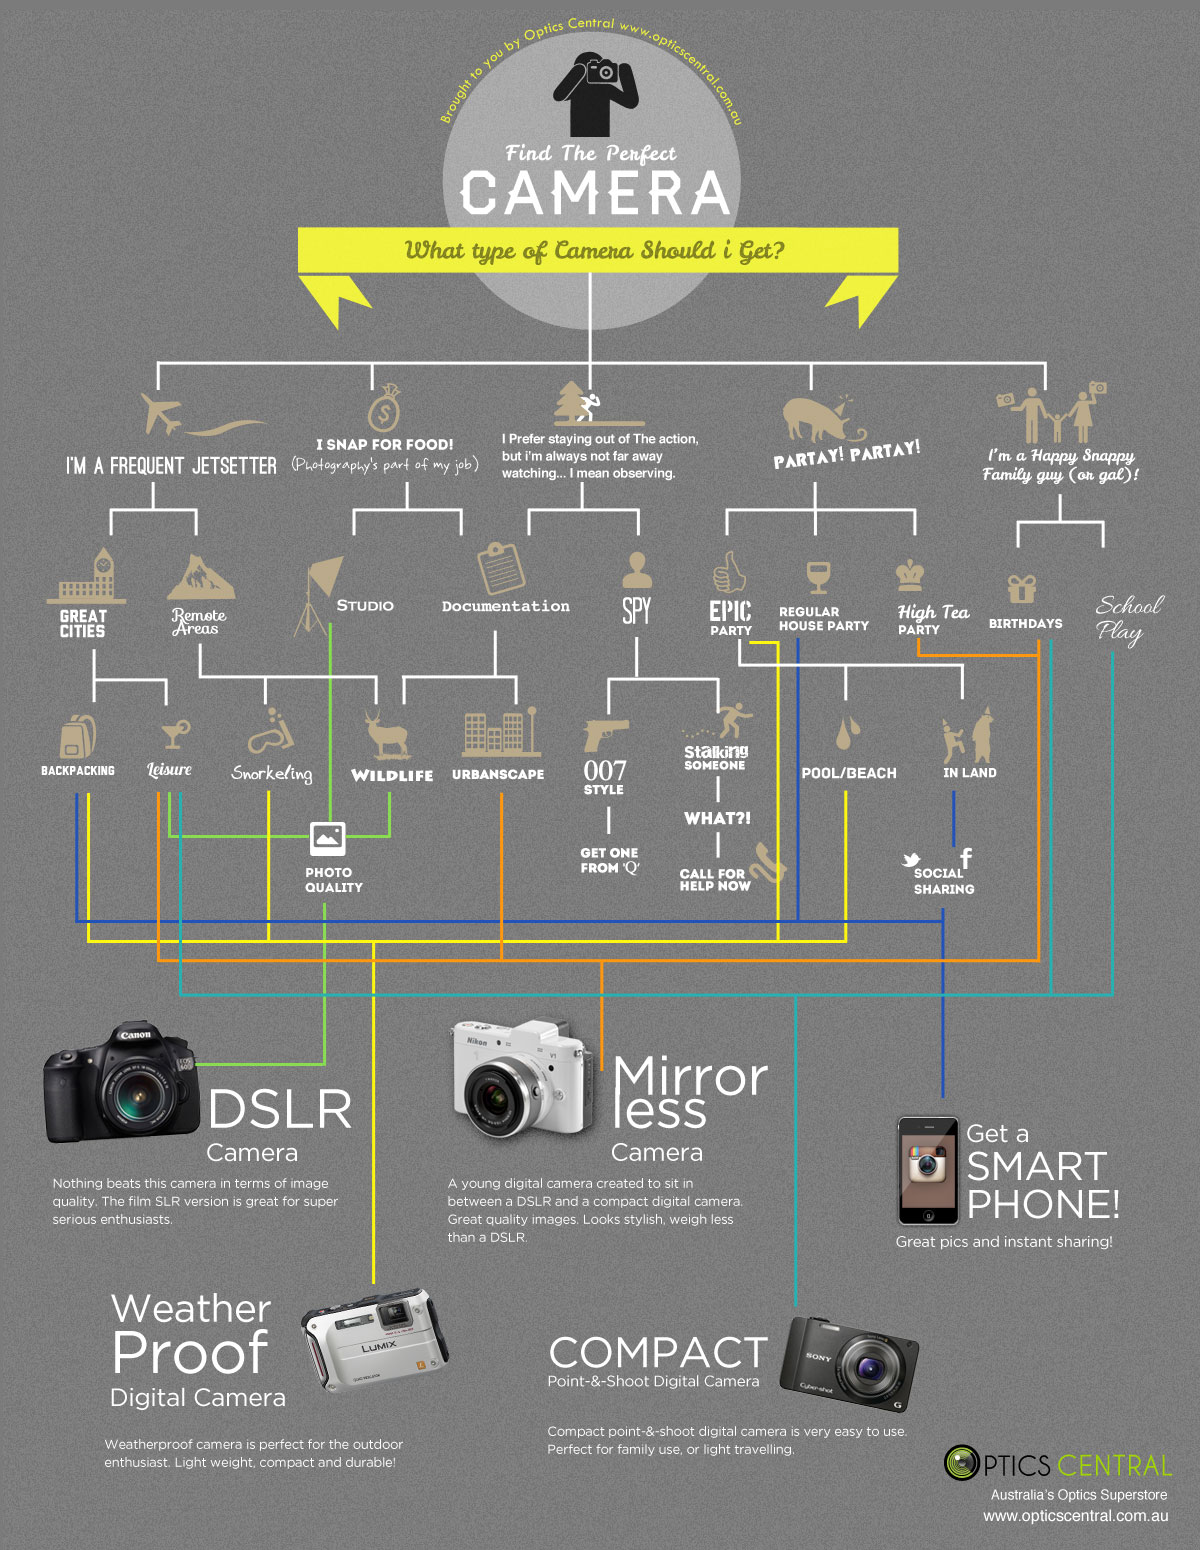 Camera Guide Will Help You Decide What Camera To Get [Infographic]